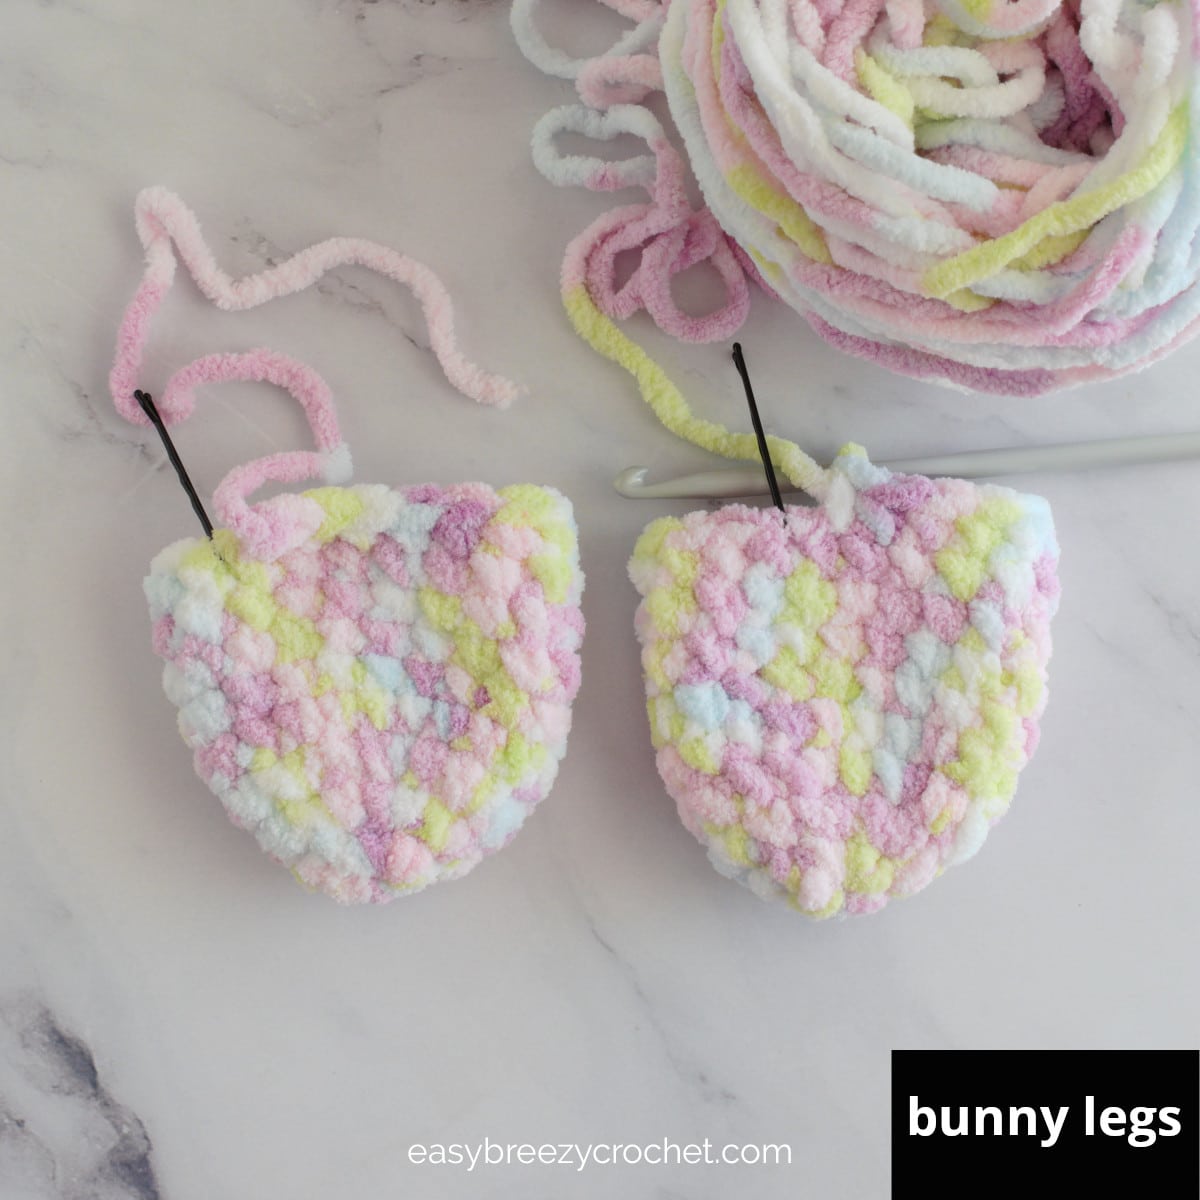 Two crochet shapes for the bunny legs.
